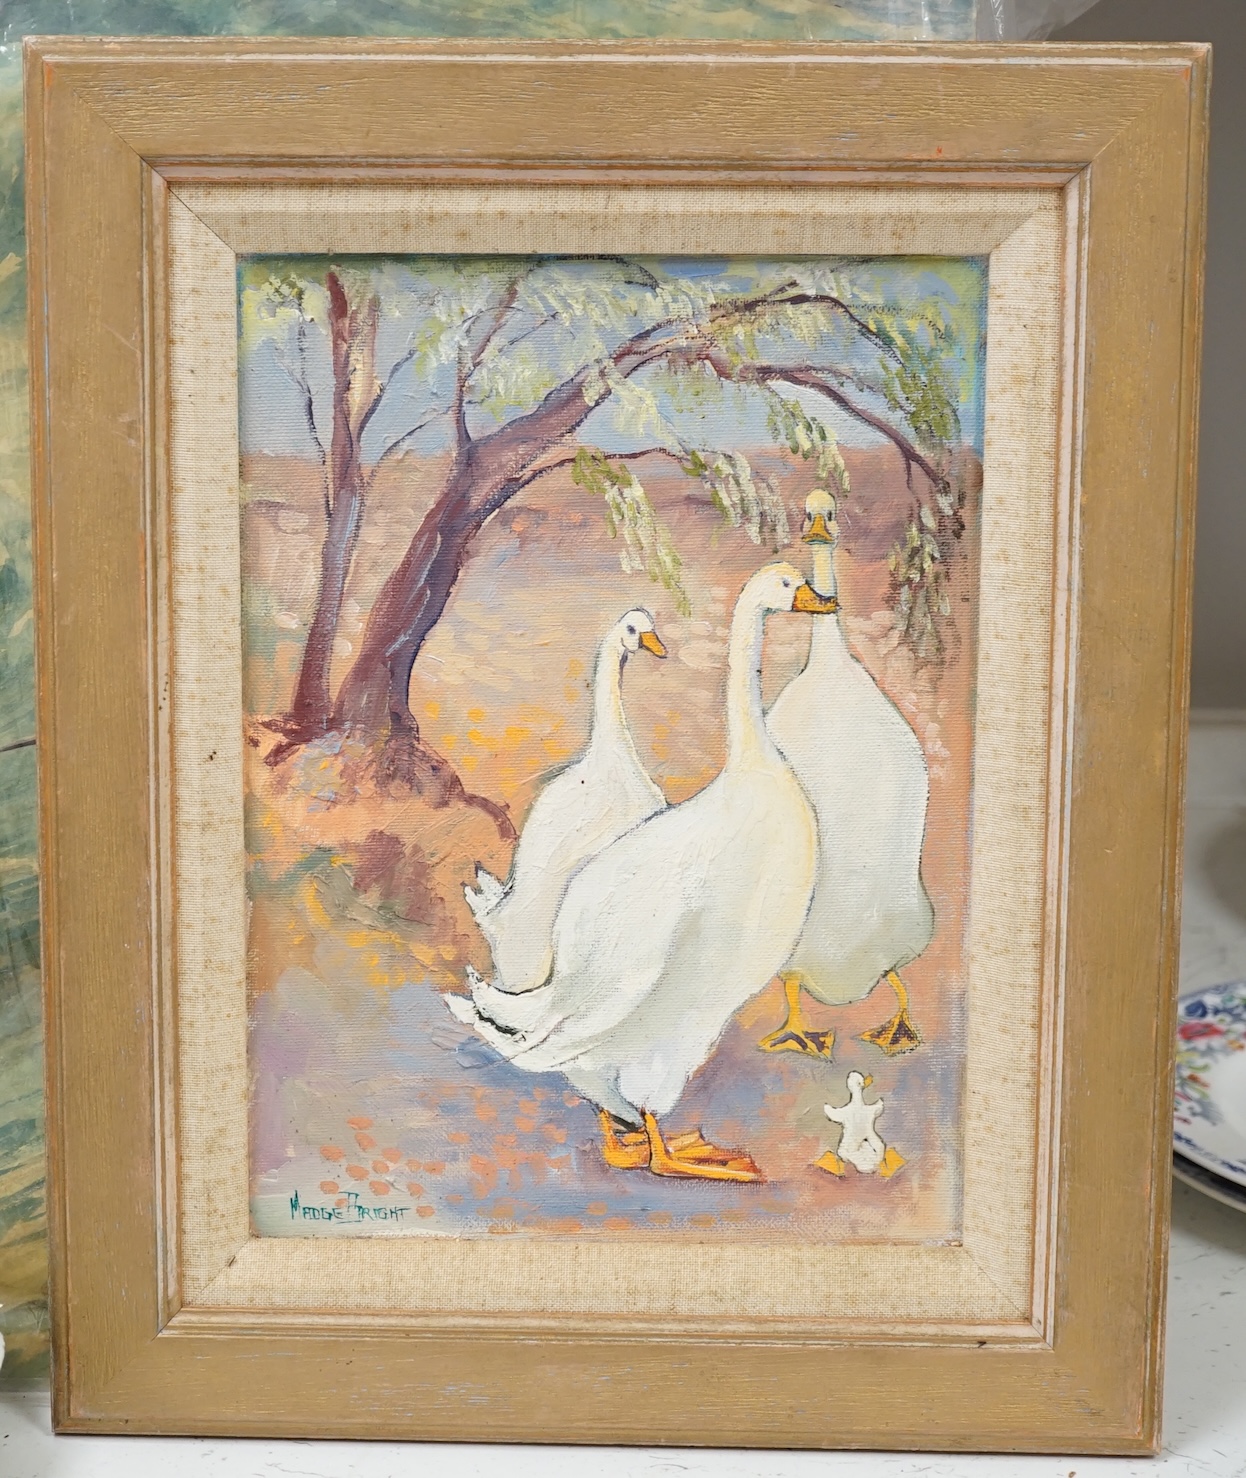 Madge Bright (20th. C), oil on board, geese before a landscape, signed, 28 x 20cm. Condition- good